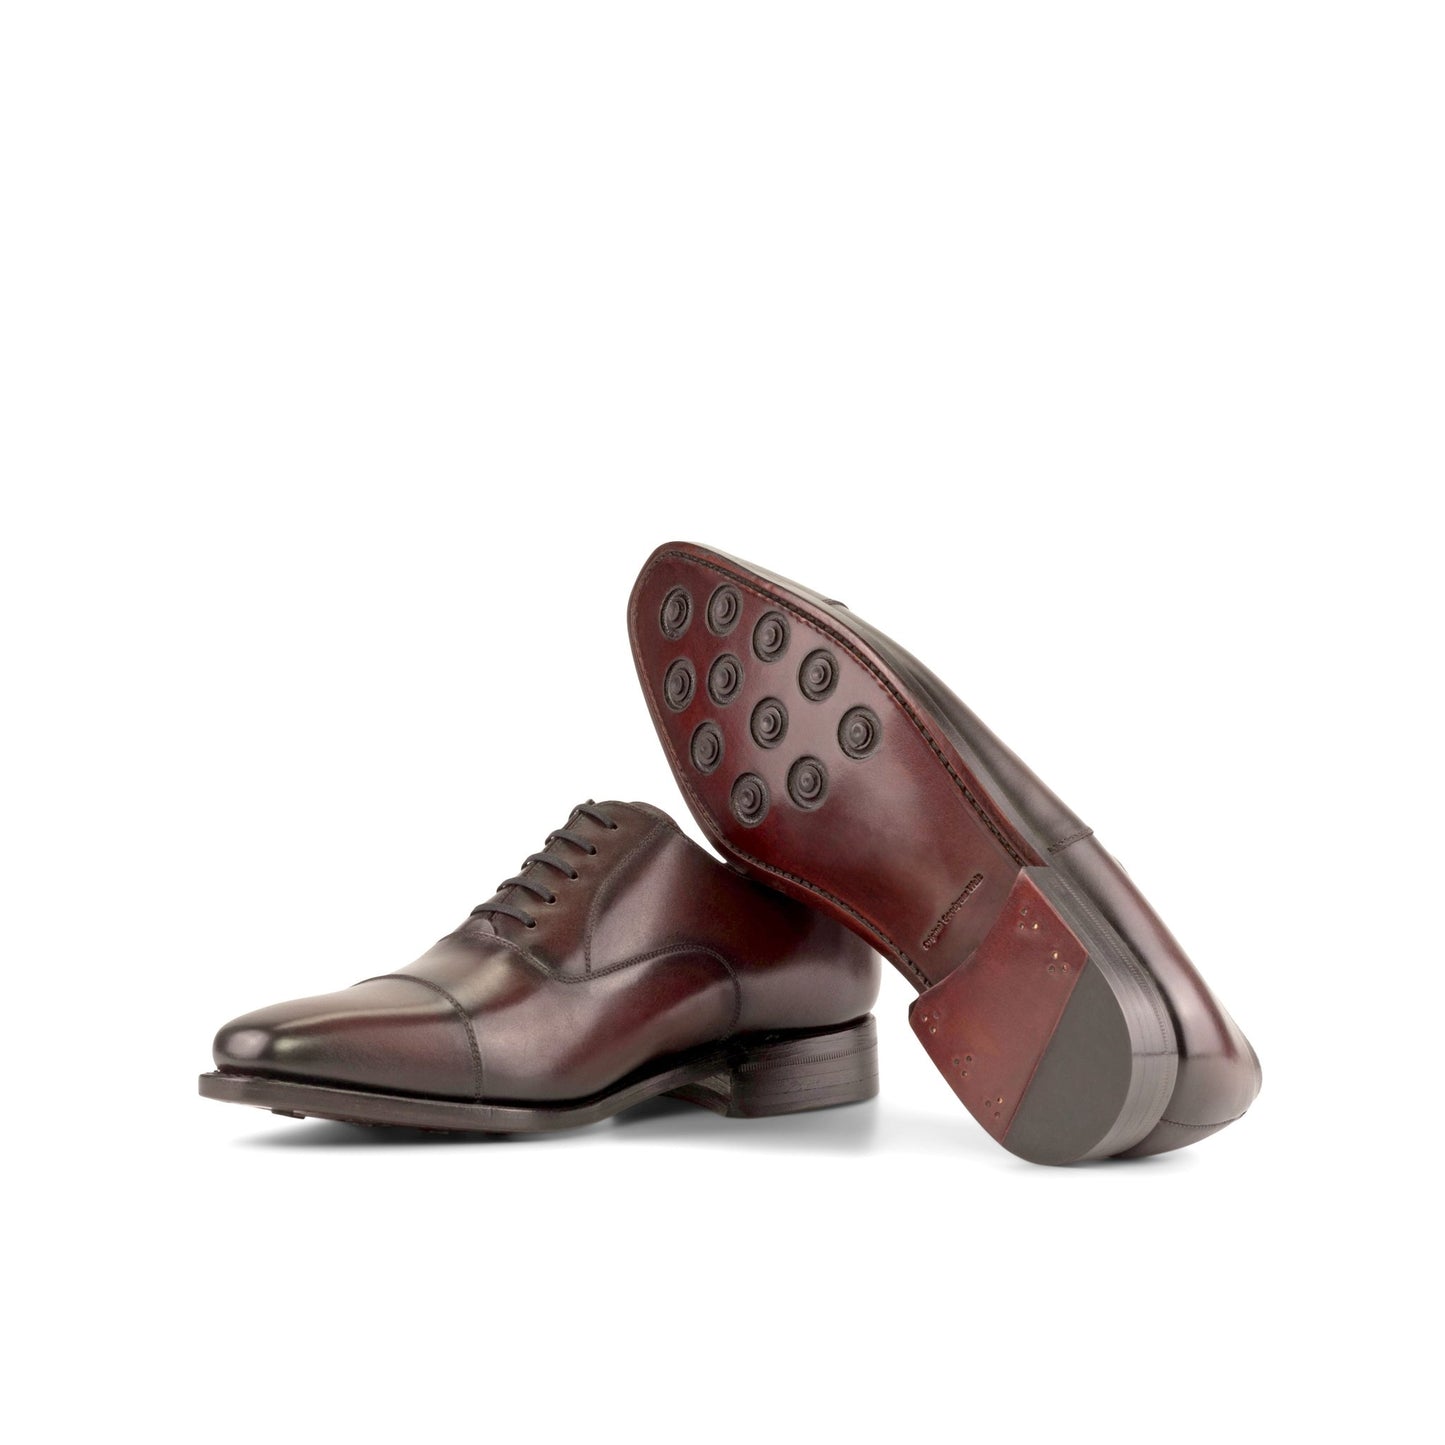 Cap Toe Oxford in Burgundy Box Calf - Zatorres | Free Shipping on orders over $200